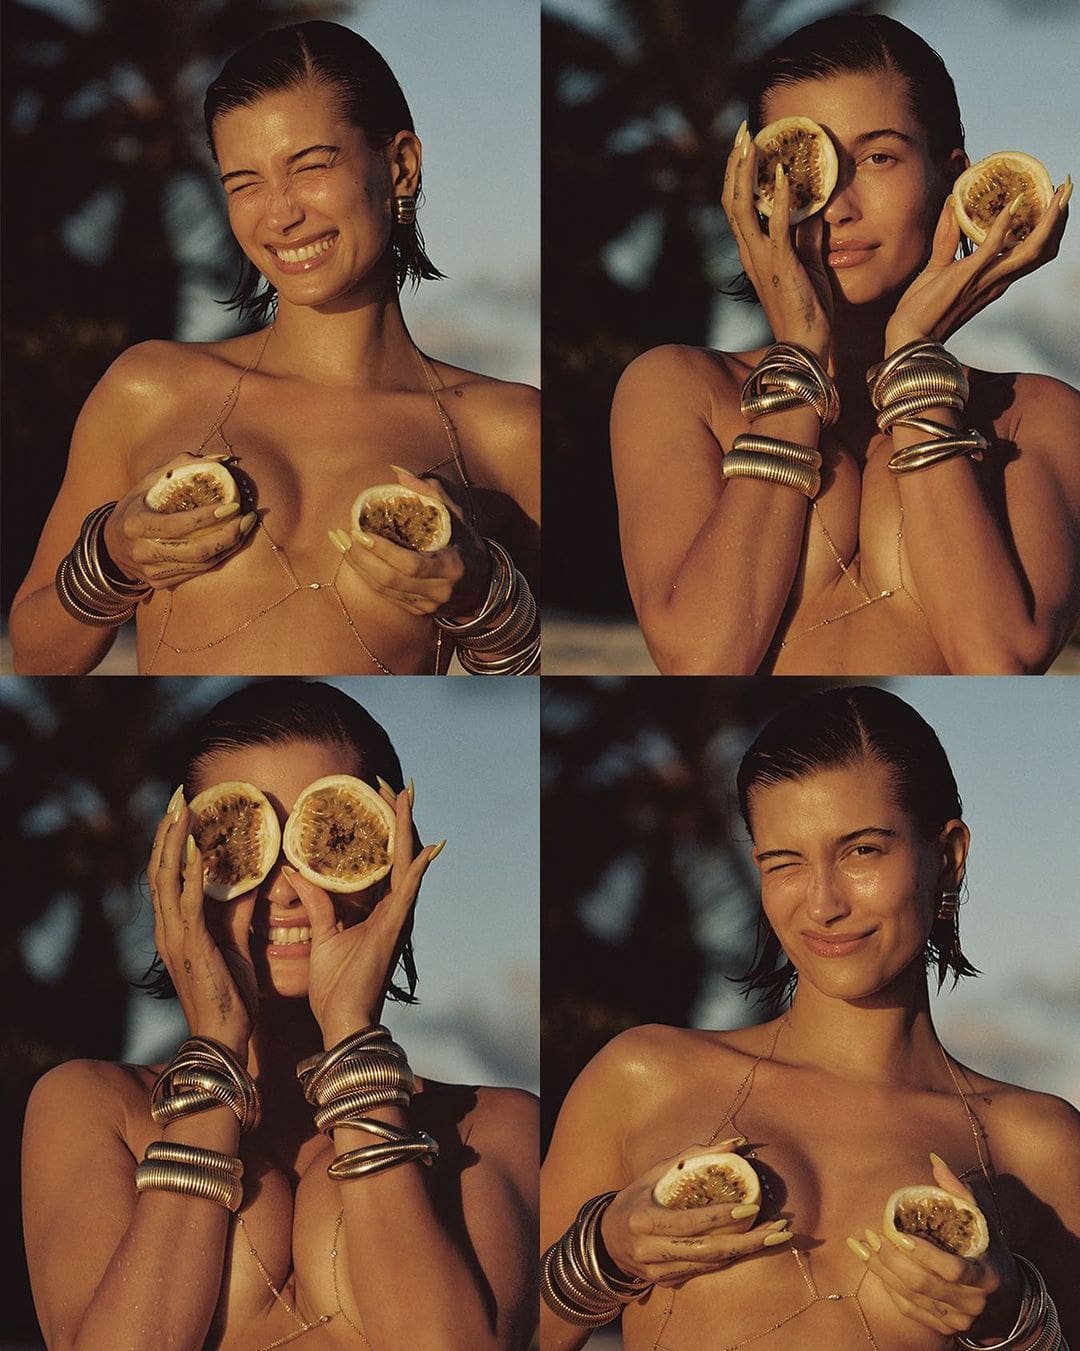 Hailey Bieber appears almost topless in Jacquie Aichie's 50-diamond bra ($10,750) while strategically holding two passion fruit halves, leaving little to the imagination